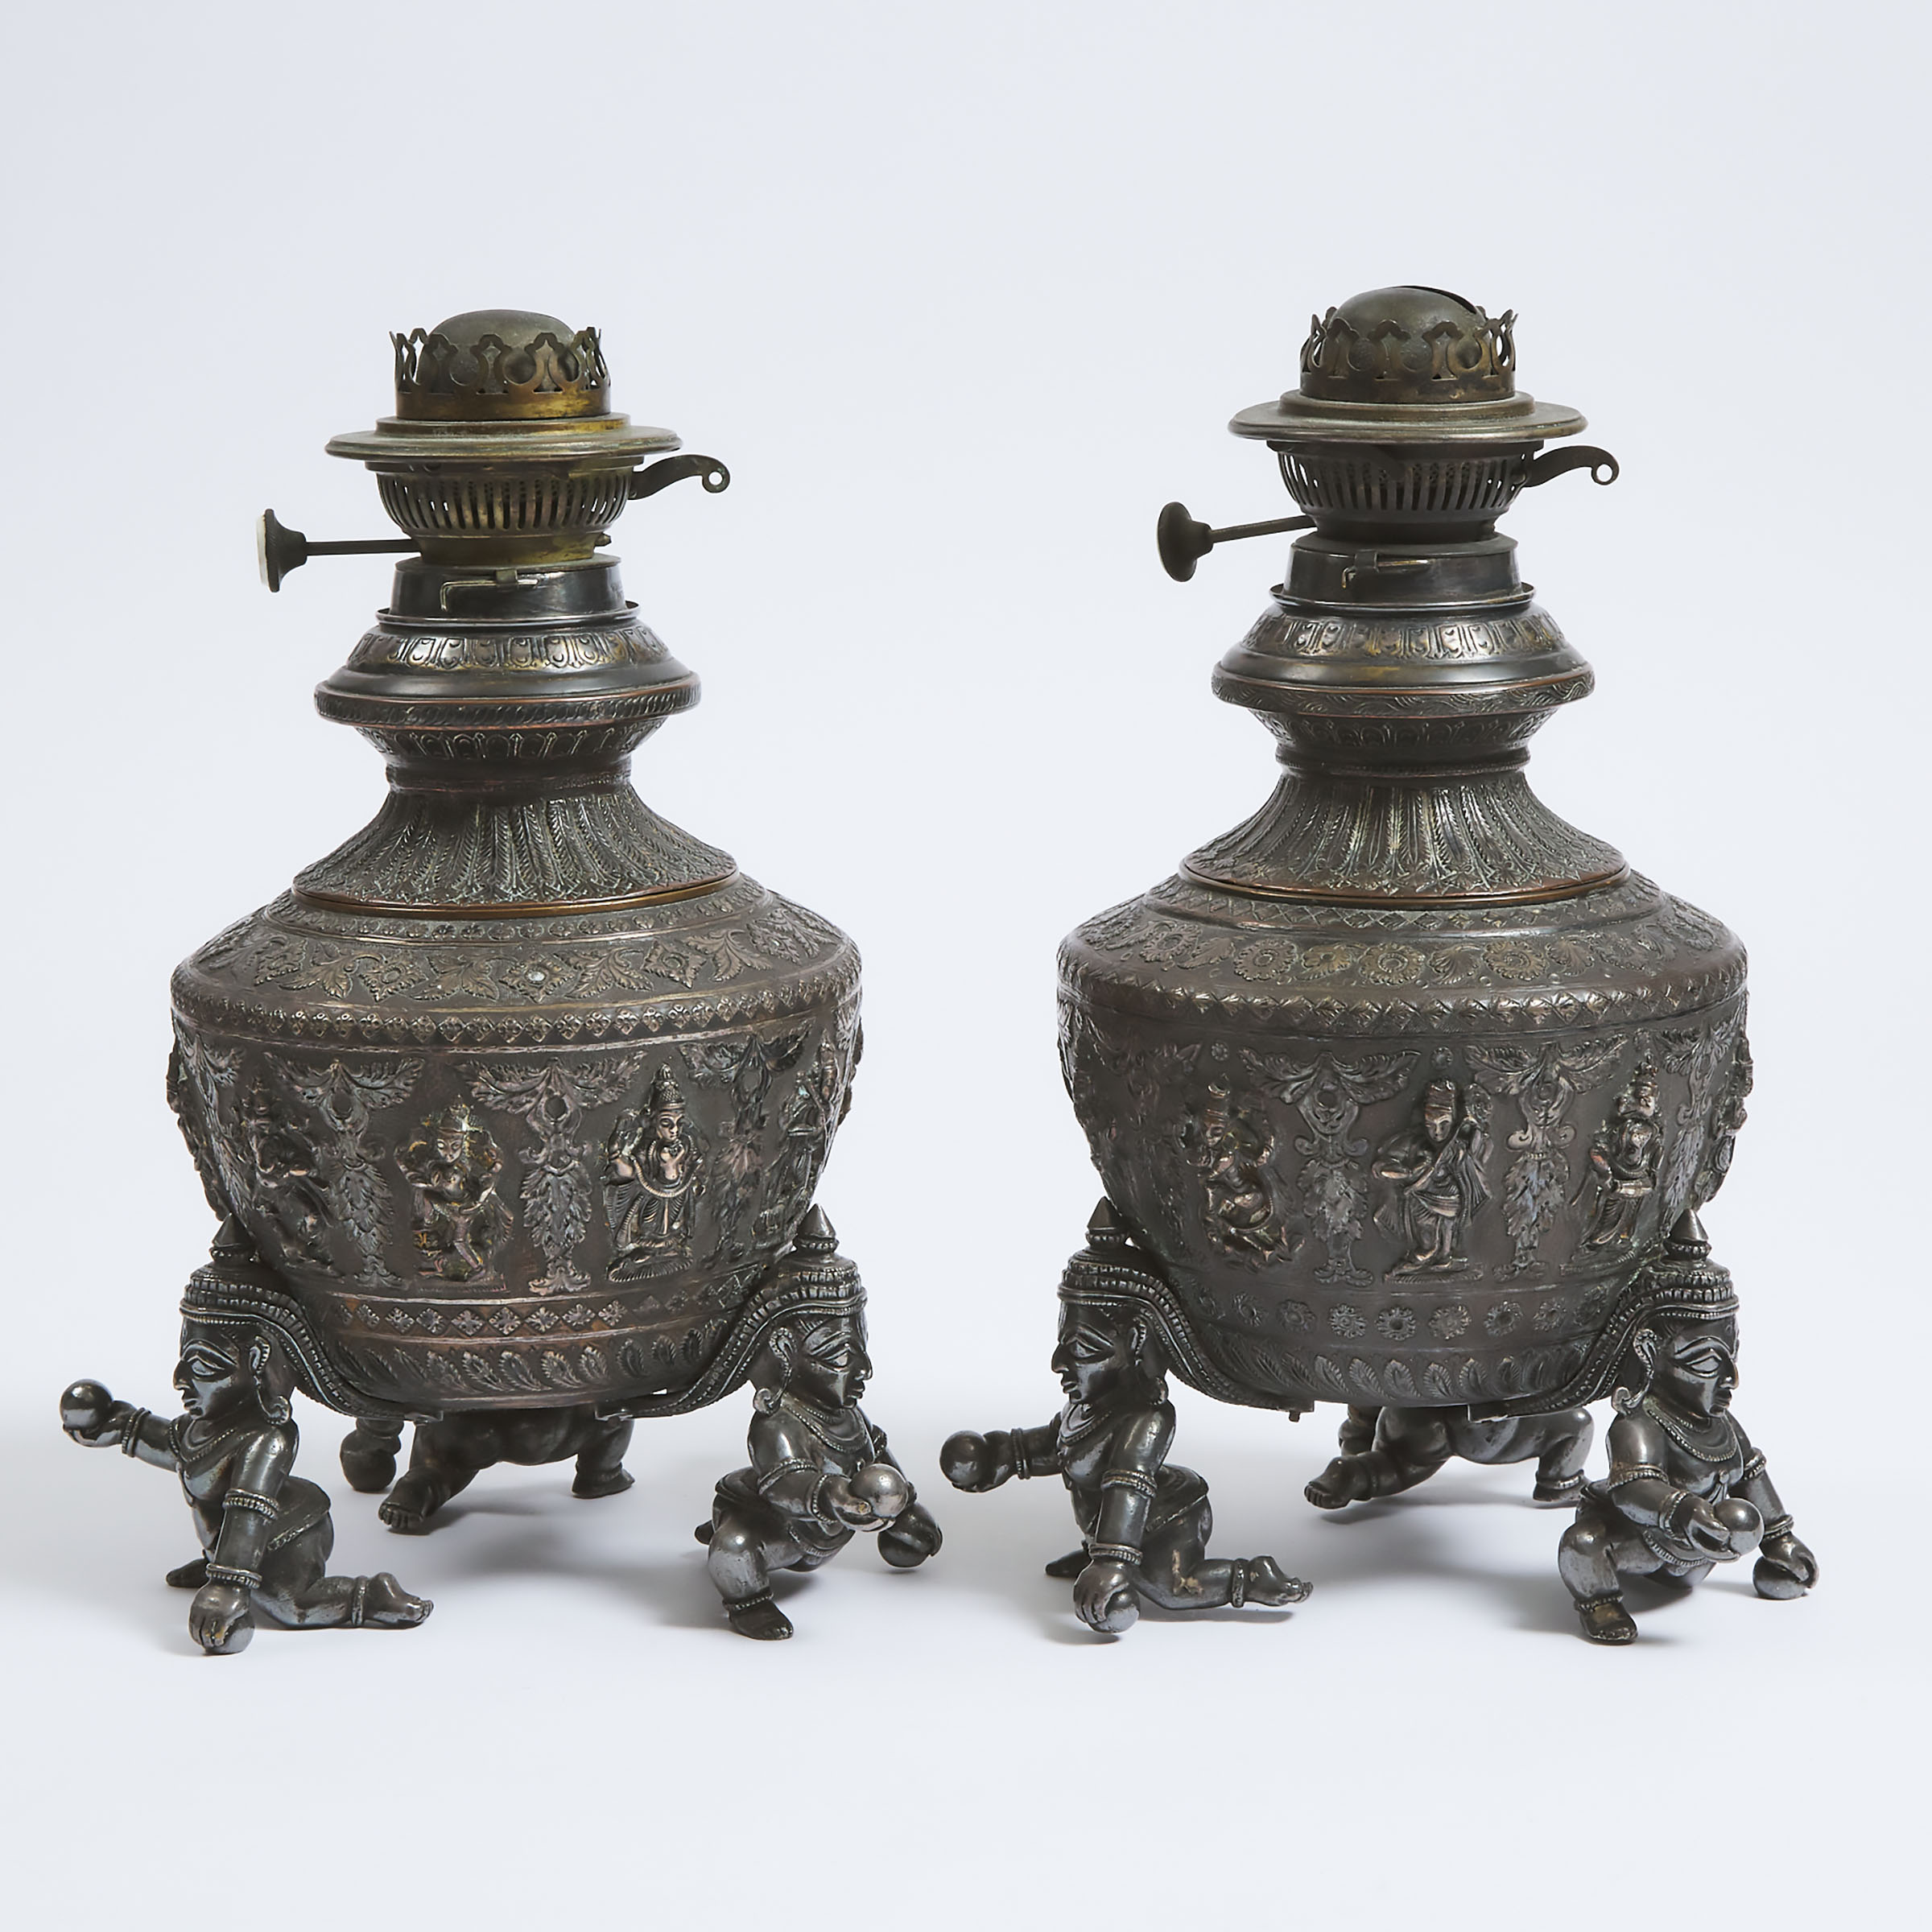 A Pair of Indian Silvered Copper Lamps, 19th/Early 20th Century